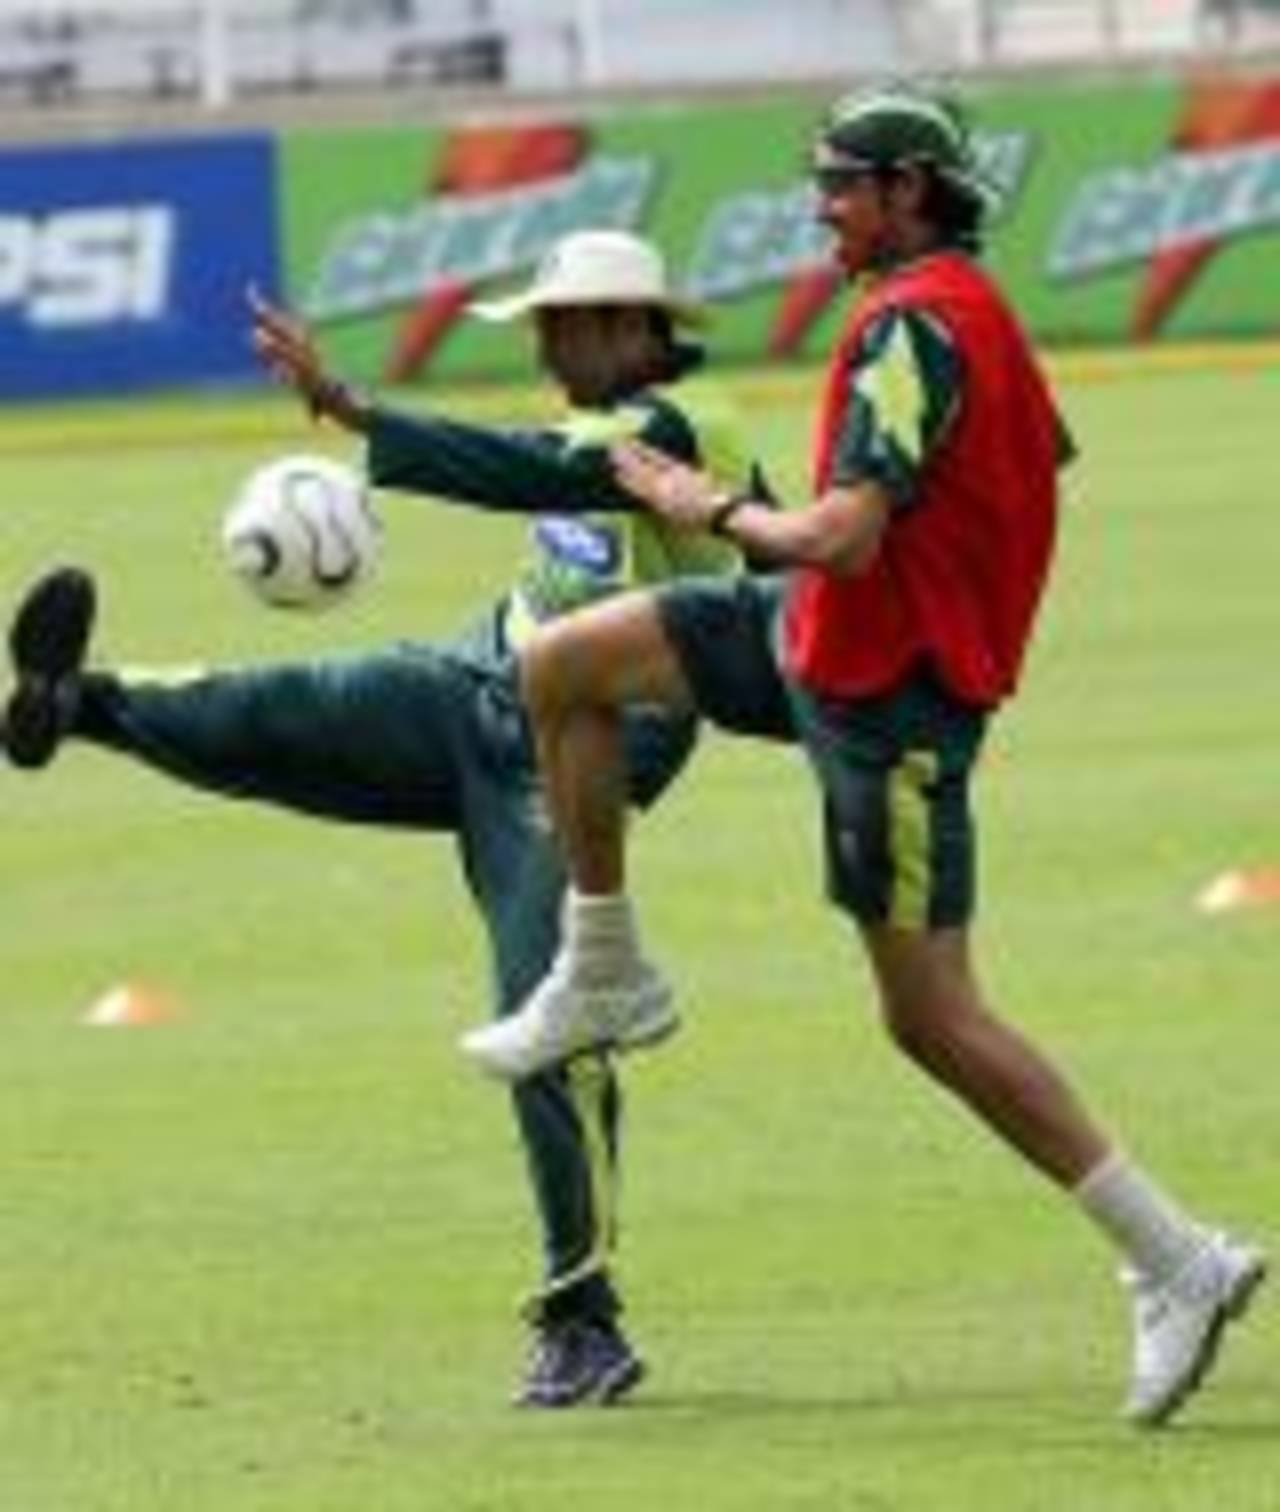 Younis Khan and Umar Gul play a bit of football, Jamaica, March 20, 2007